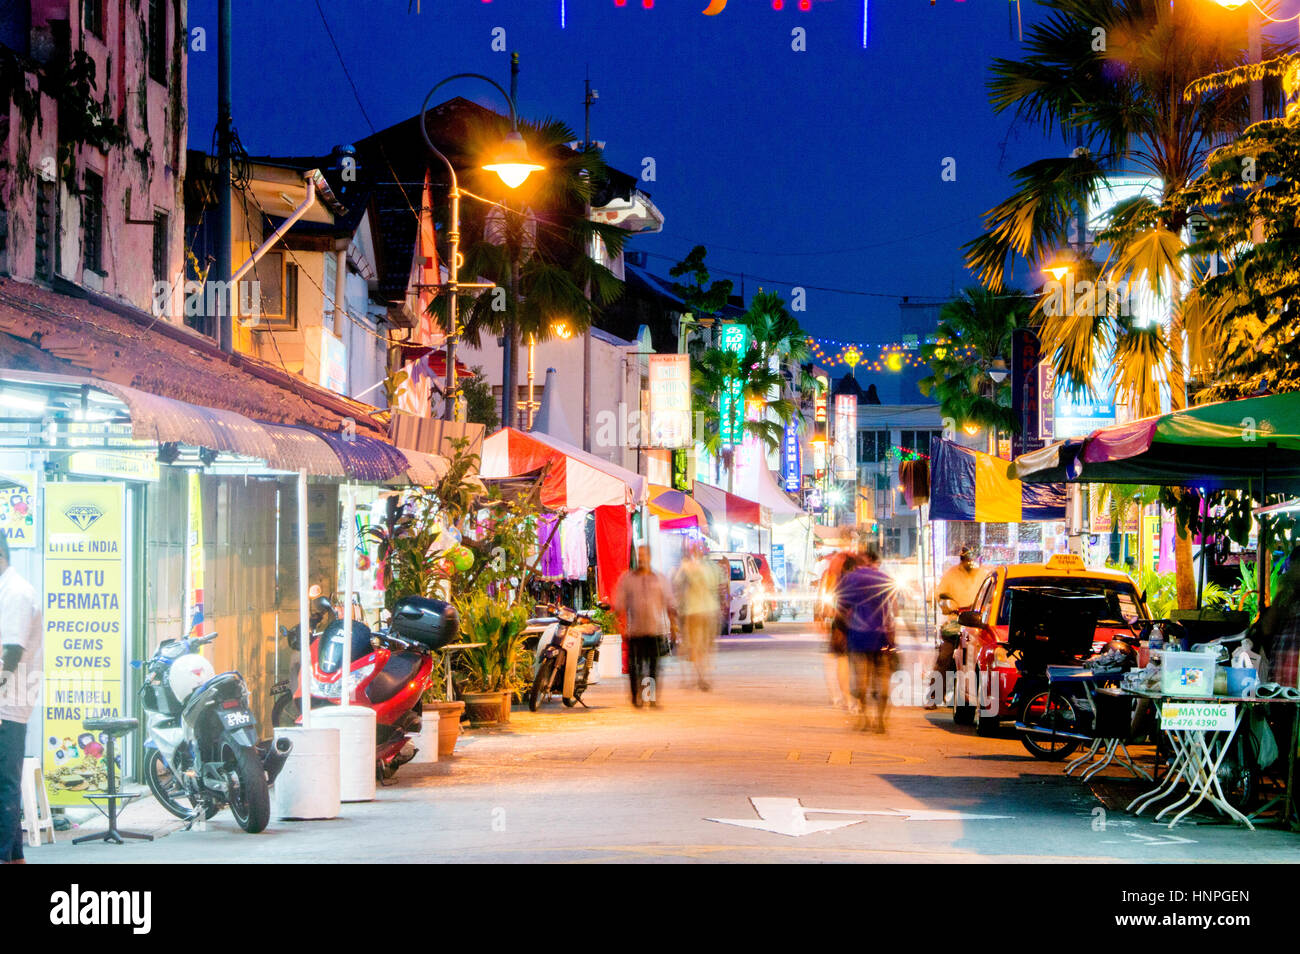 Street scene at night with indian shops and stall, Lebuh Pasar, Little India, Georgetown, Penang, Malaysia Stock Photo